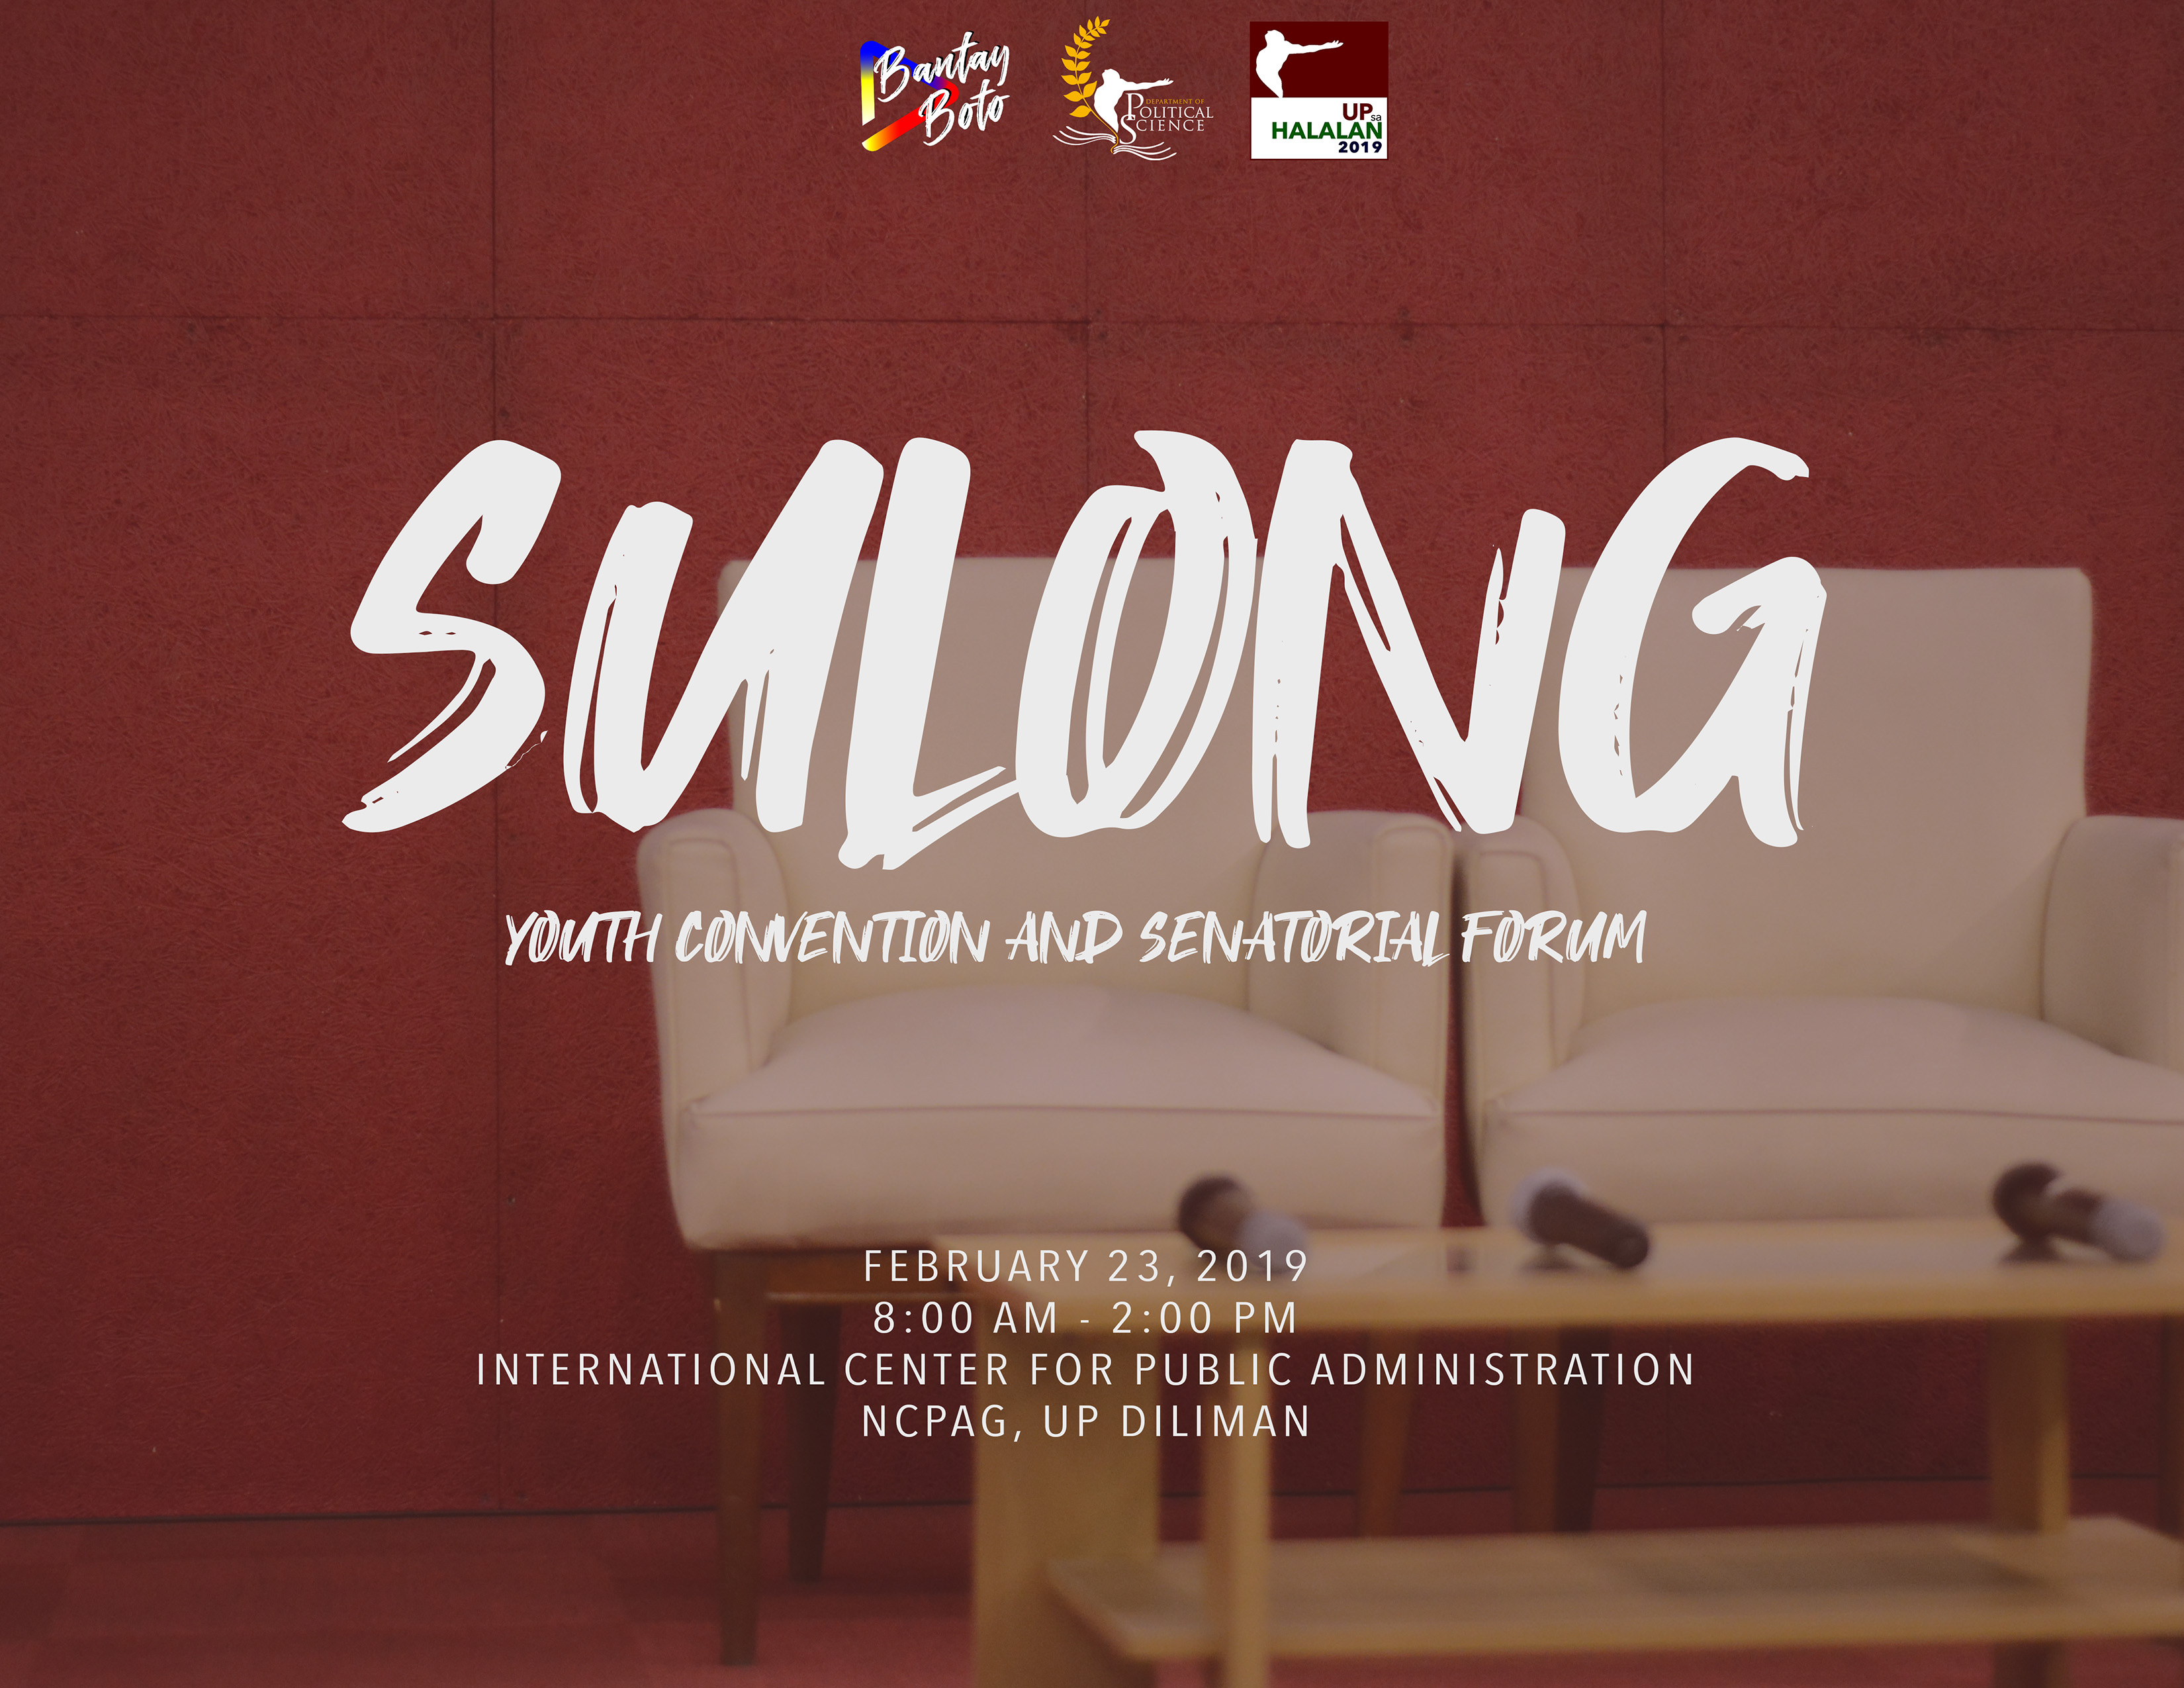 Sulong: Youth Convention and Senatorial Forum